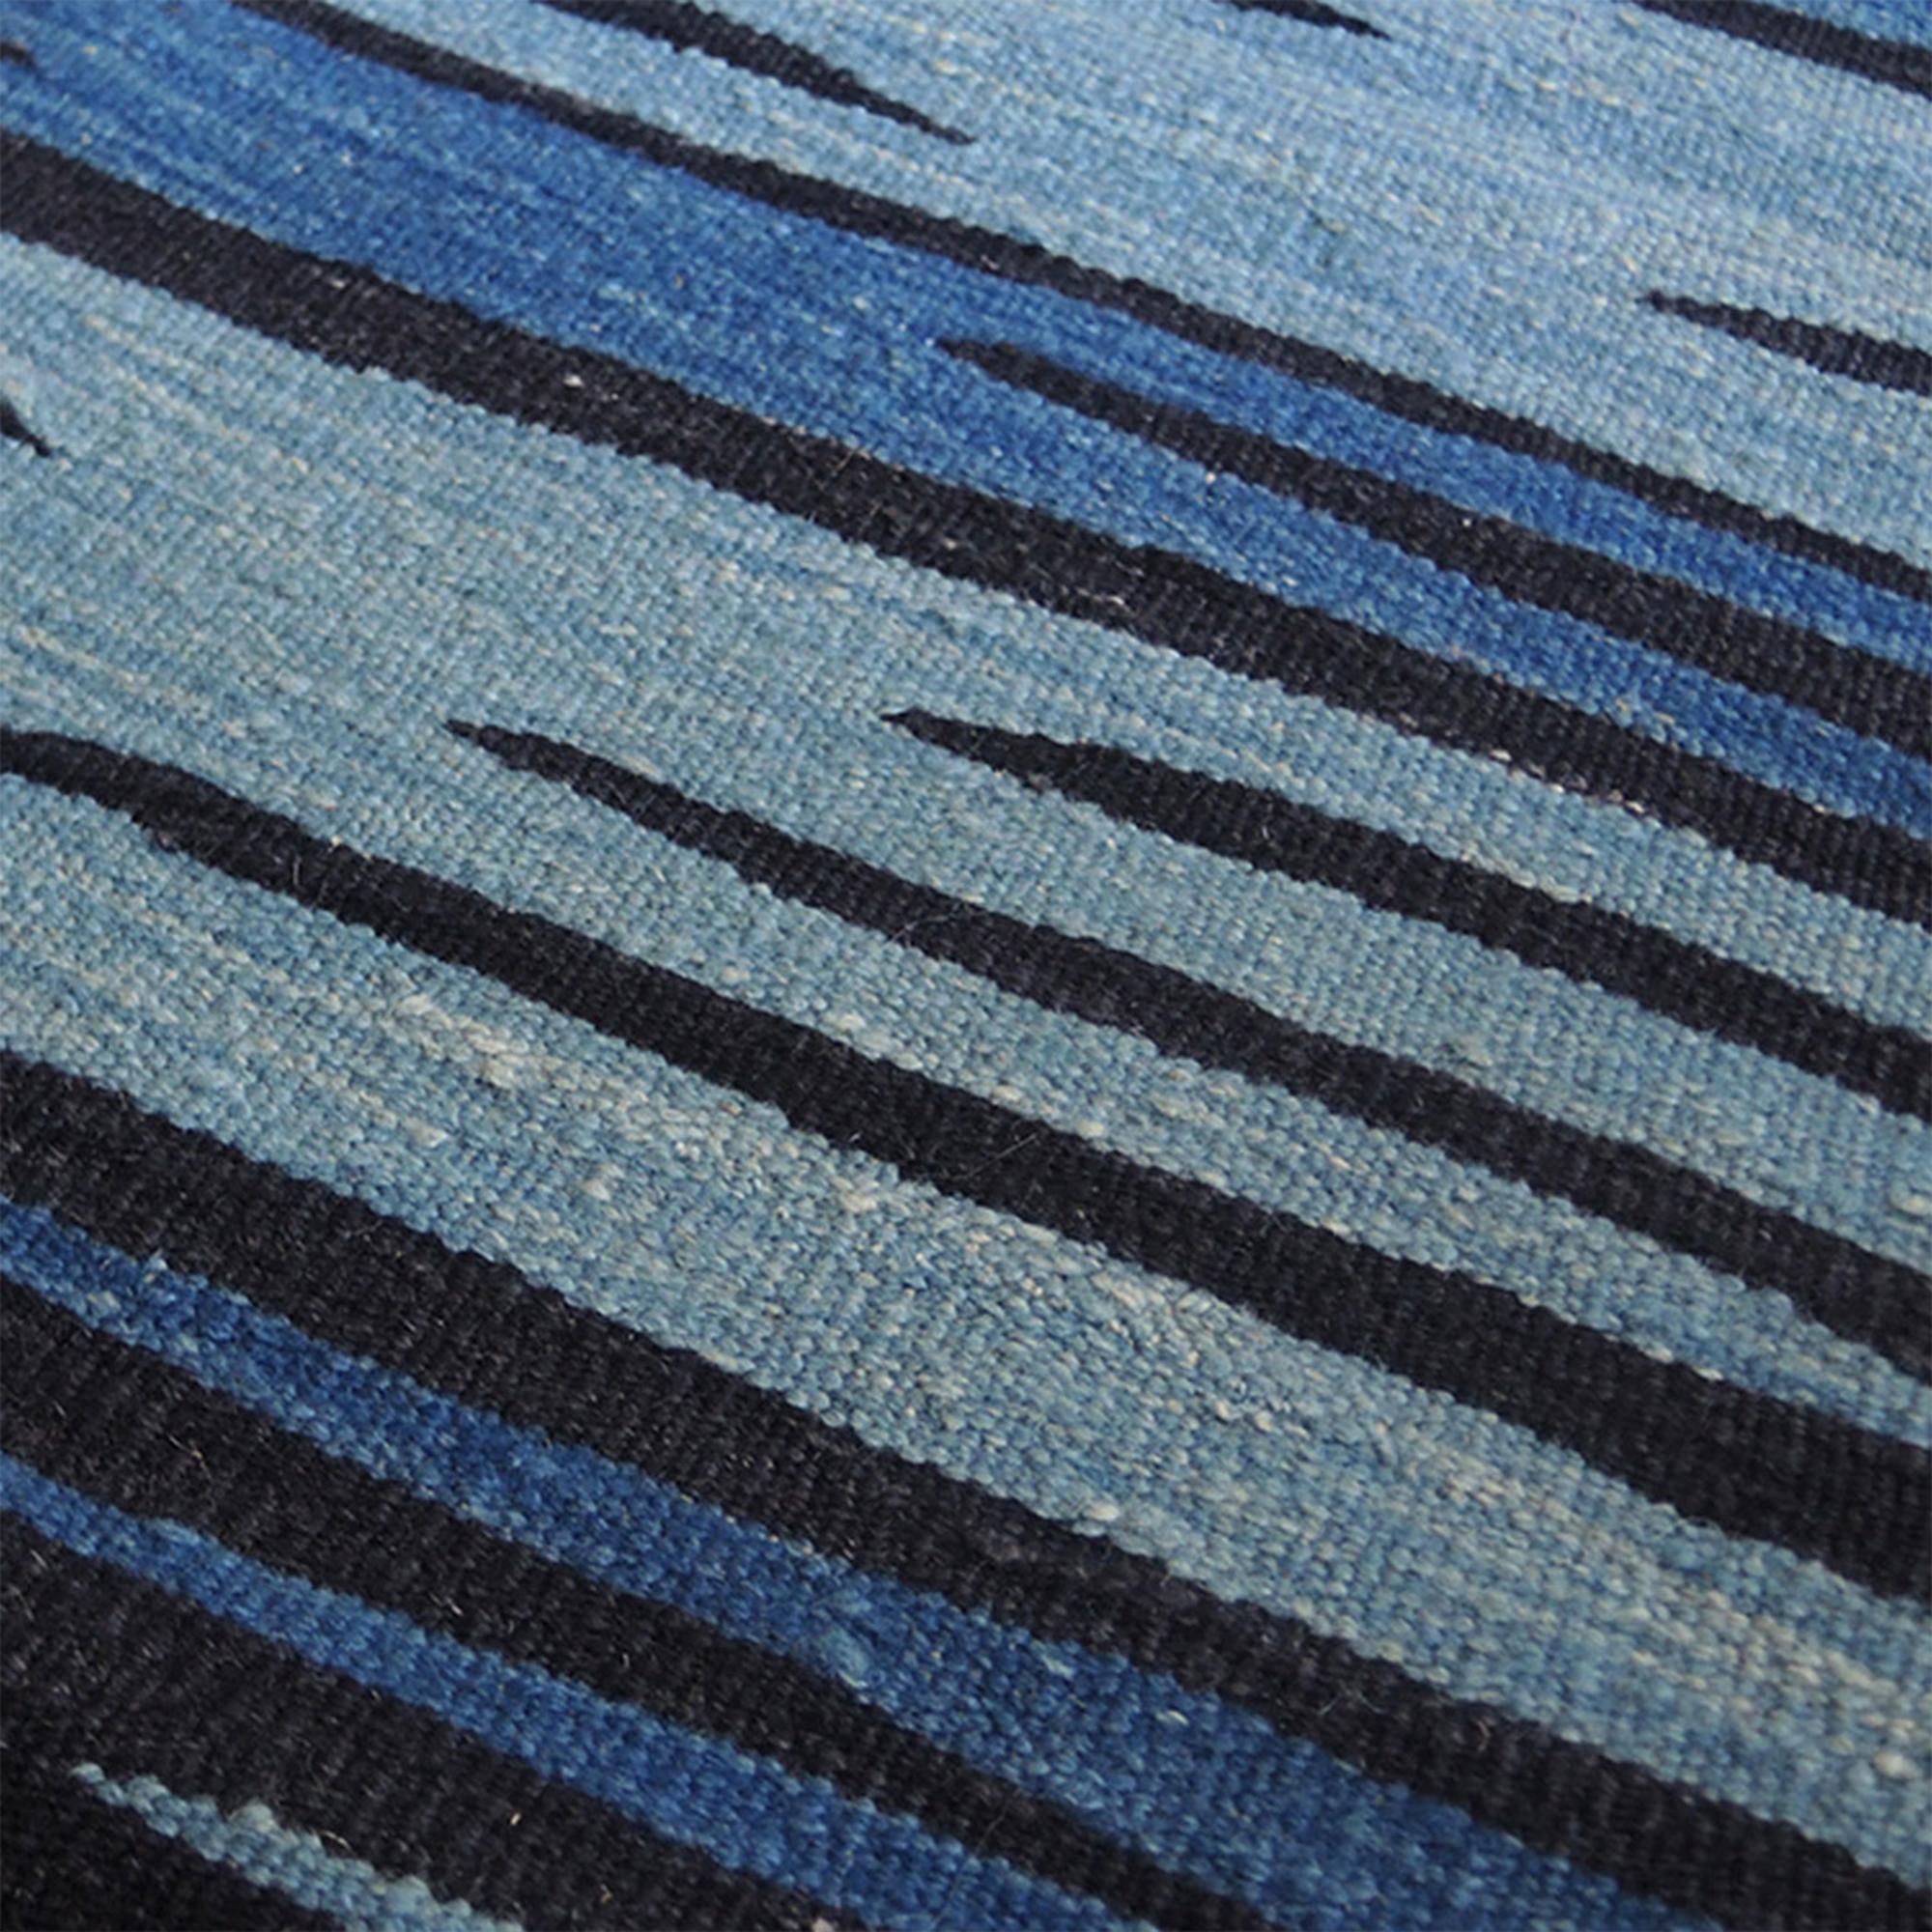 Ege No 2 Contemporary Modern Kilim Rug Wool Handwoven Midnight and Blue In New Condition For Sale In Istanbul, TR